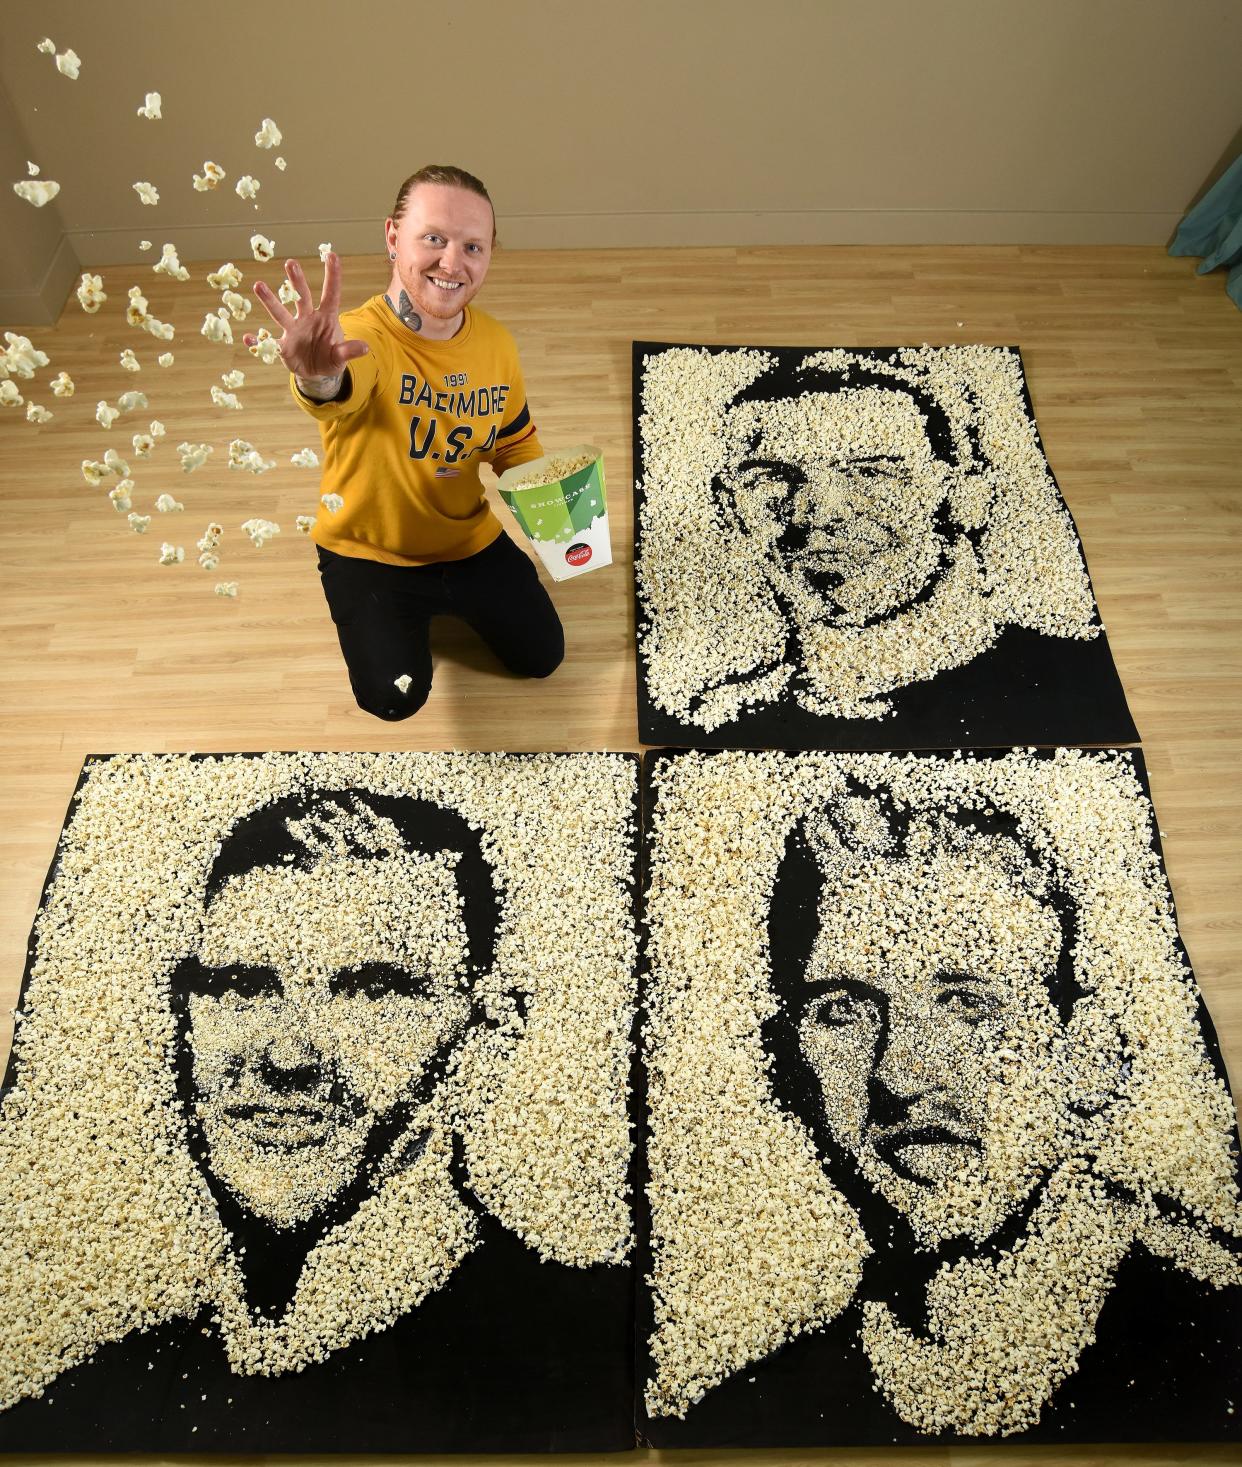 Pictured: To celebrate Showcase will be doing free screenings of the Euros, portraits have been made of the three captains from England, Scotland and Wales.  The footballers are made out of popcorn by artist, Nathan Wyburn.
